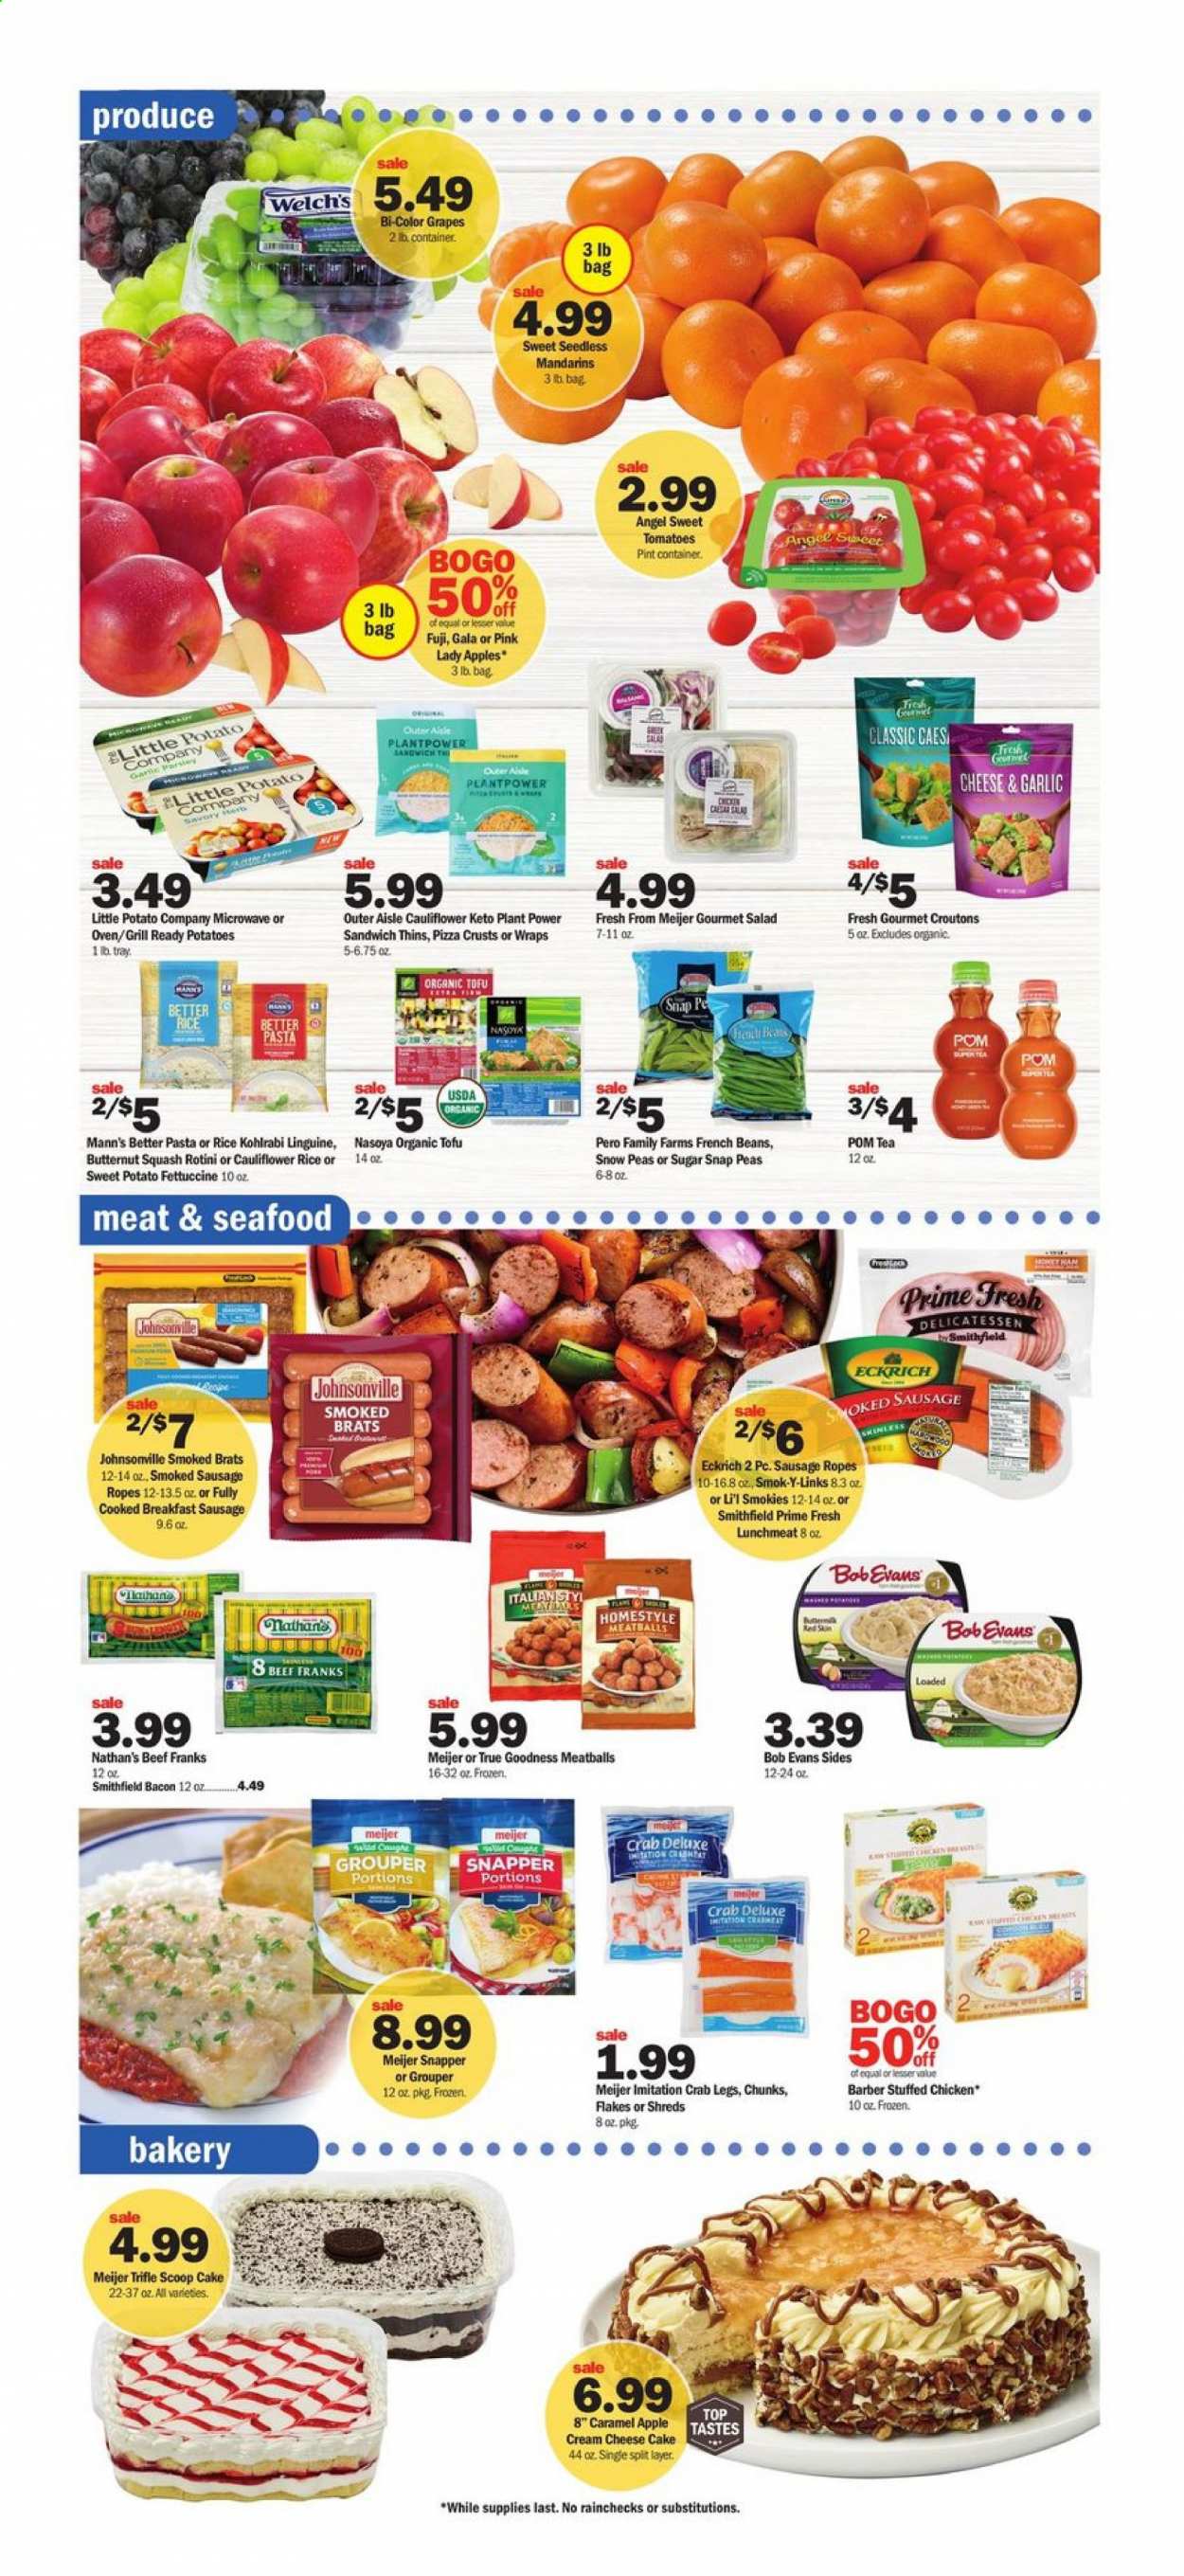 thumbnail - Meijer Flyer - 07/18/2021 - 07/24/2021 - Sales products - cake, wraps, cheesecake, cauliflower, french beans, garlic, sweet potato, tomatoes, potatoes, peas, kohlrabi, snap peas, snow peas, salad, apples, Gala, grapes, mandarines, Welch's, Pink Lady, grouper, seafood, crab legs, crab, pizza, meatballs, sandwich, Bob Evans, stuffed chicken, bacon, Johnsonville, sausage, smoked sausage, lunch meat, tofu, Thins, croutons, tea, tray, pen, grill, butternut squash. Page 4.